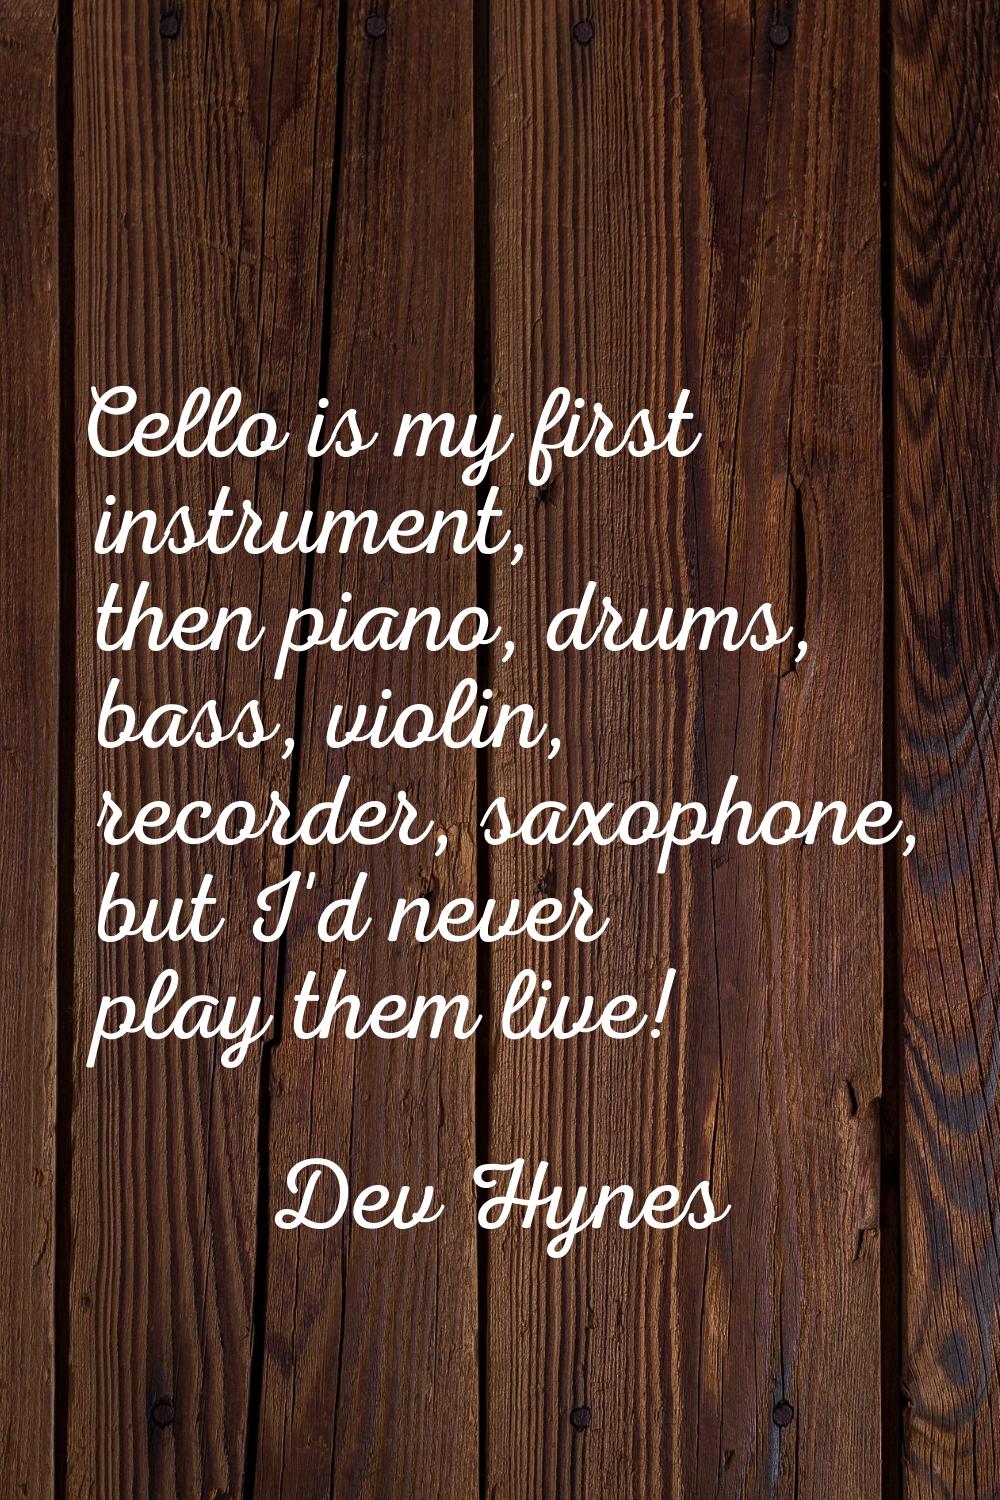 Cello is my first instrument, then piano, drums, bass, violin, recorder, saxophone, but I'd never p